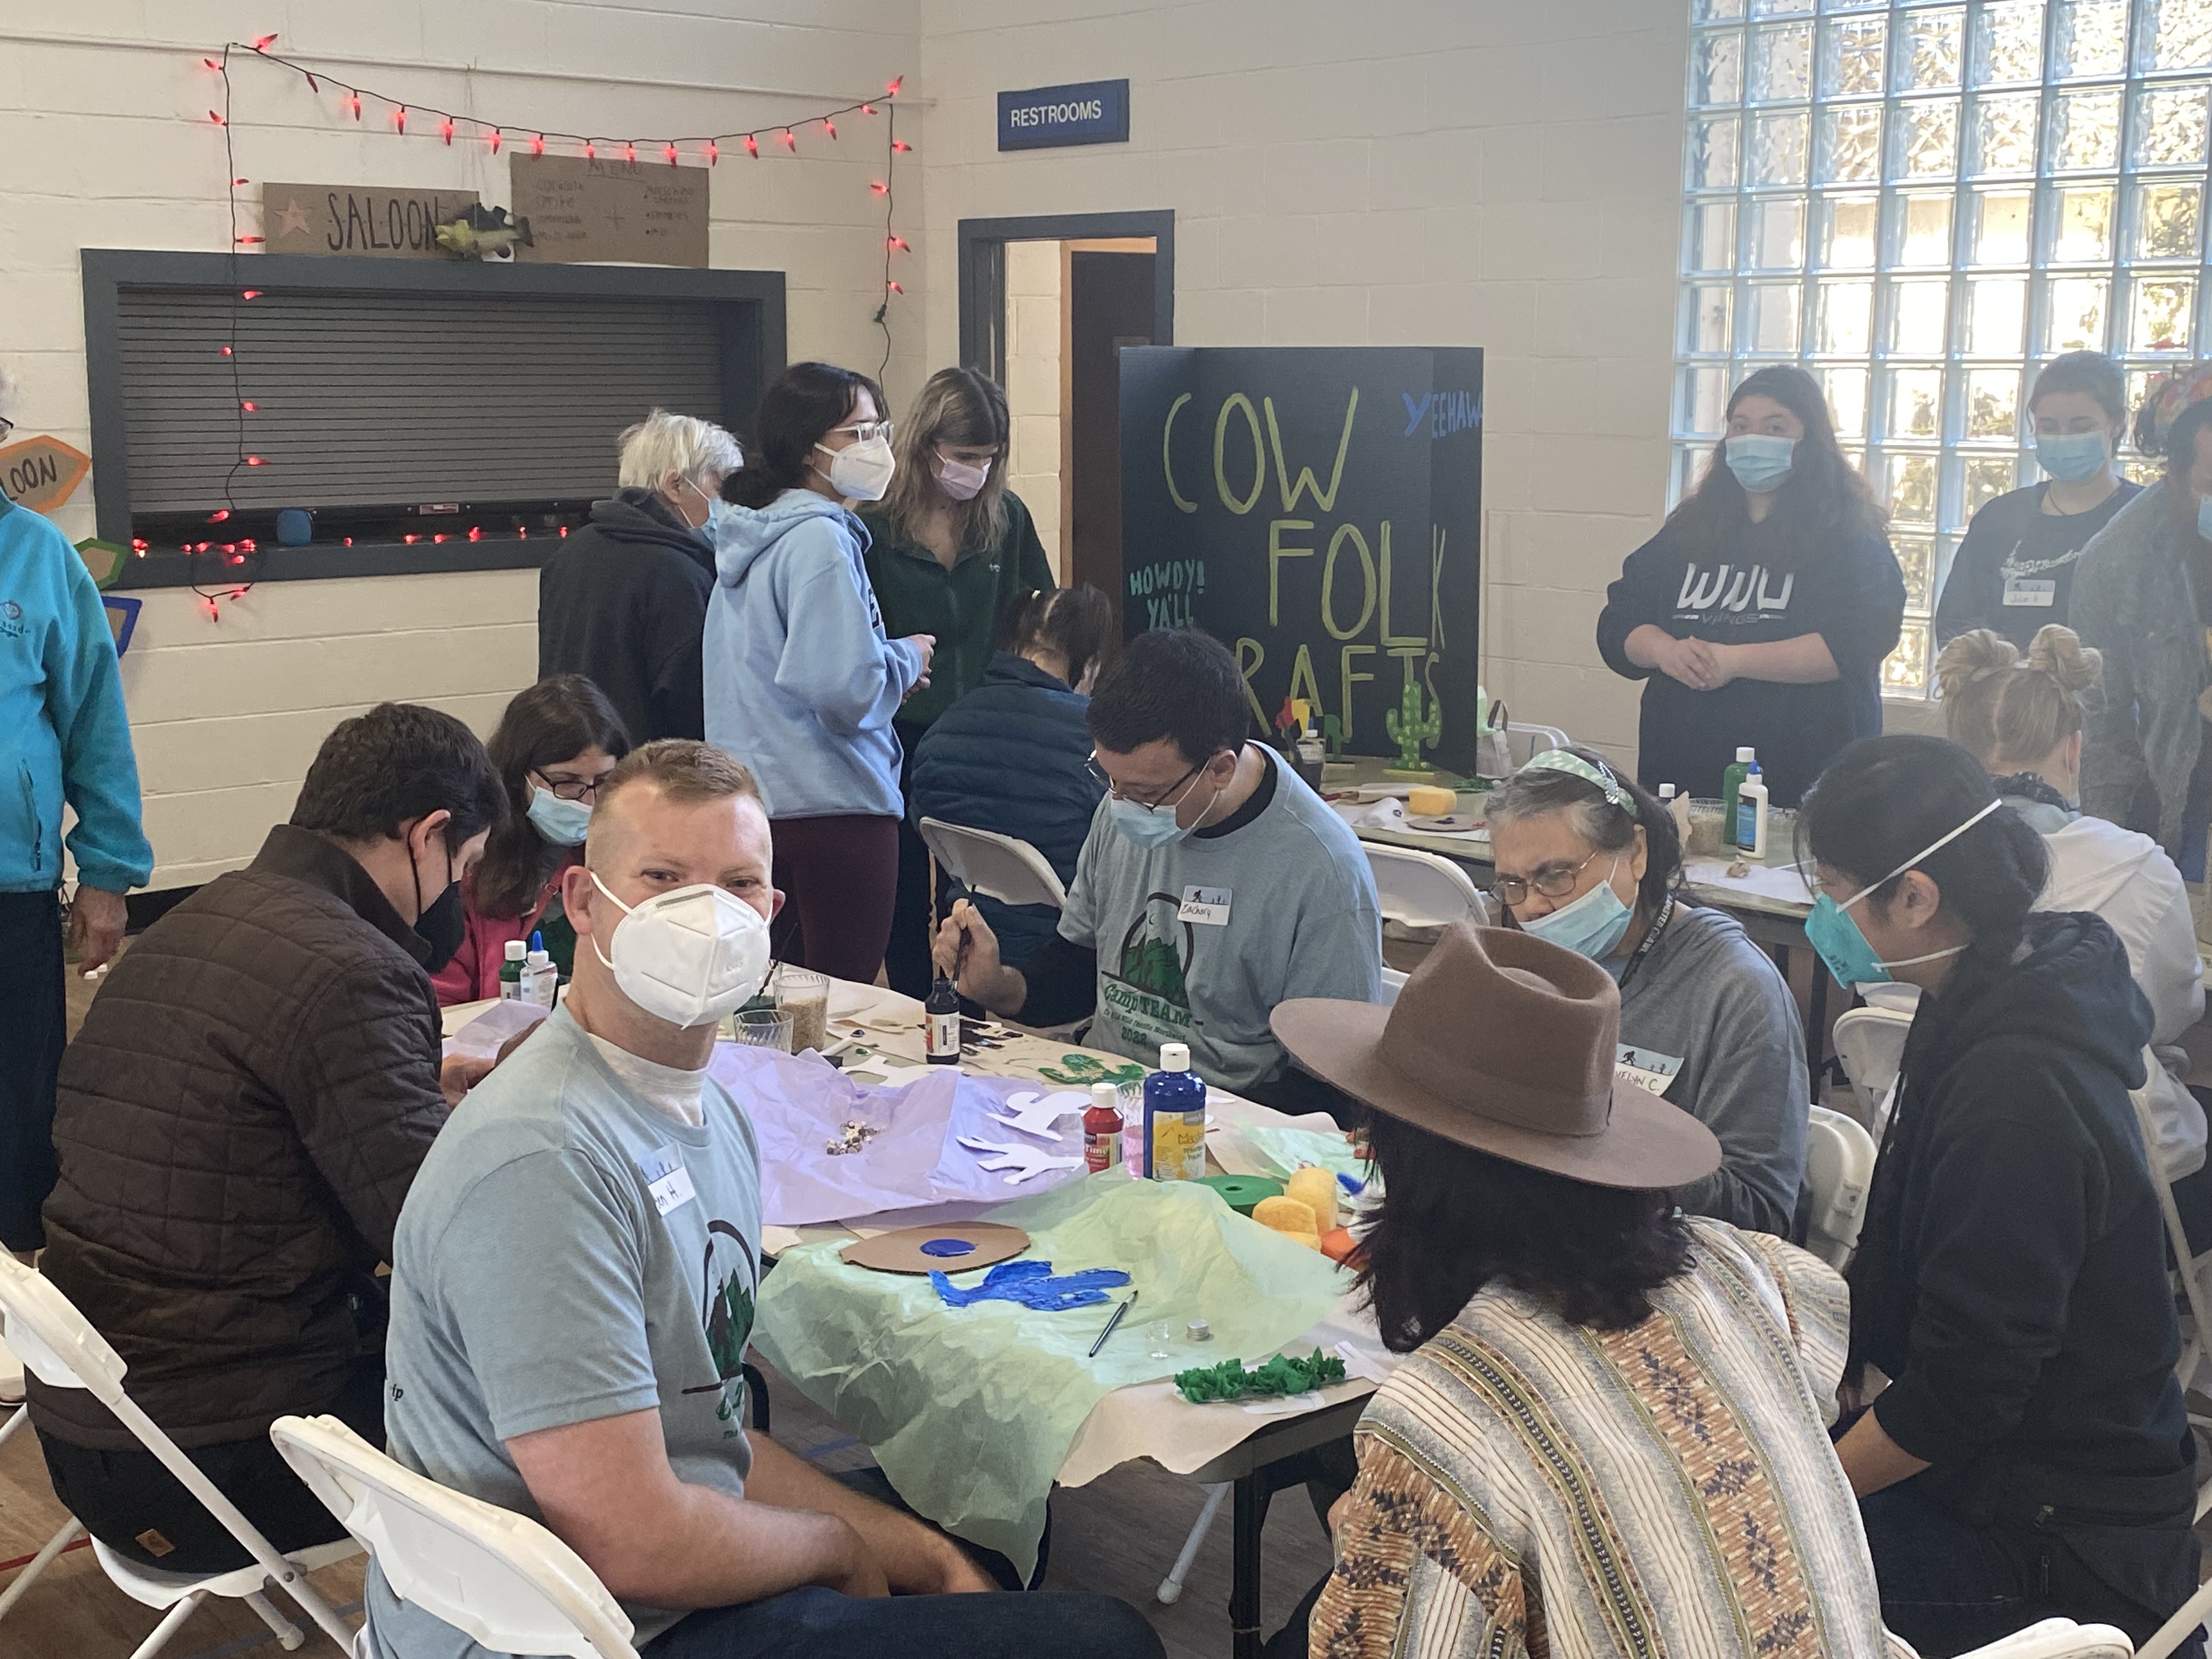 Students sitting at two tables, painting art projects